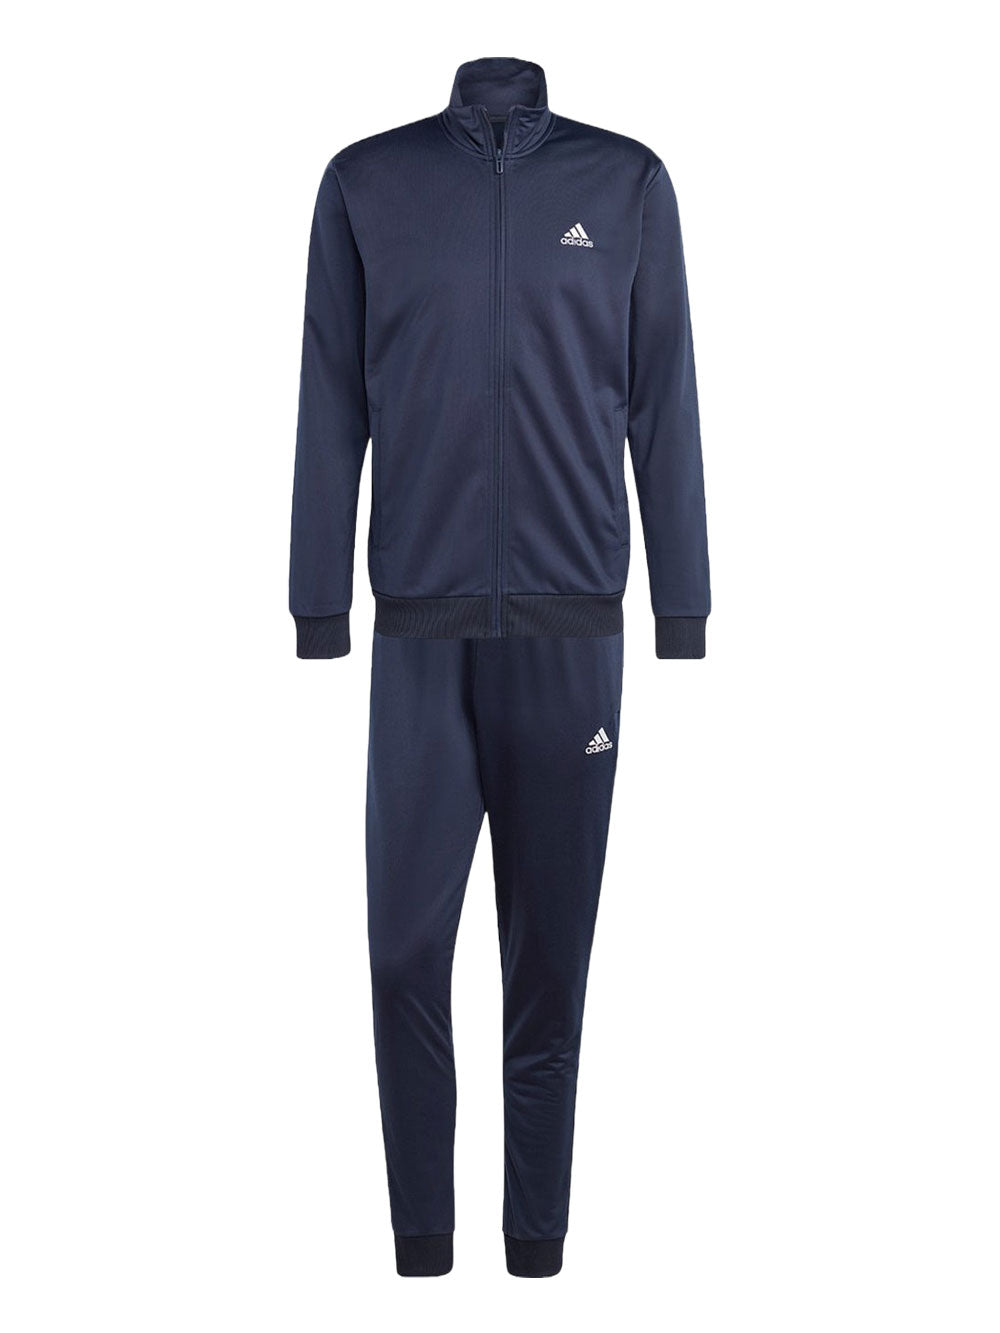 Adidas Adidas Logo Tricot Tracksuit for Men - Blue HZ2219 | Opportunity ...